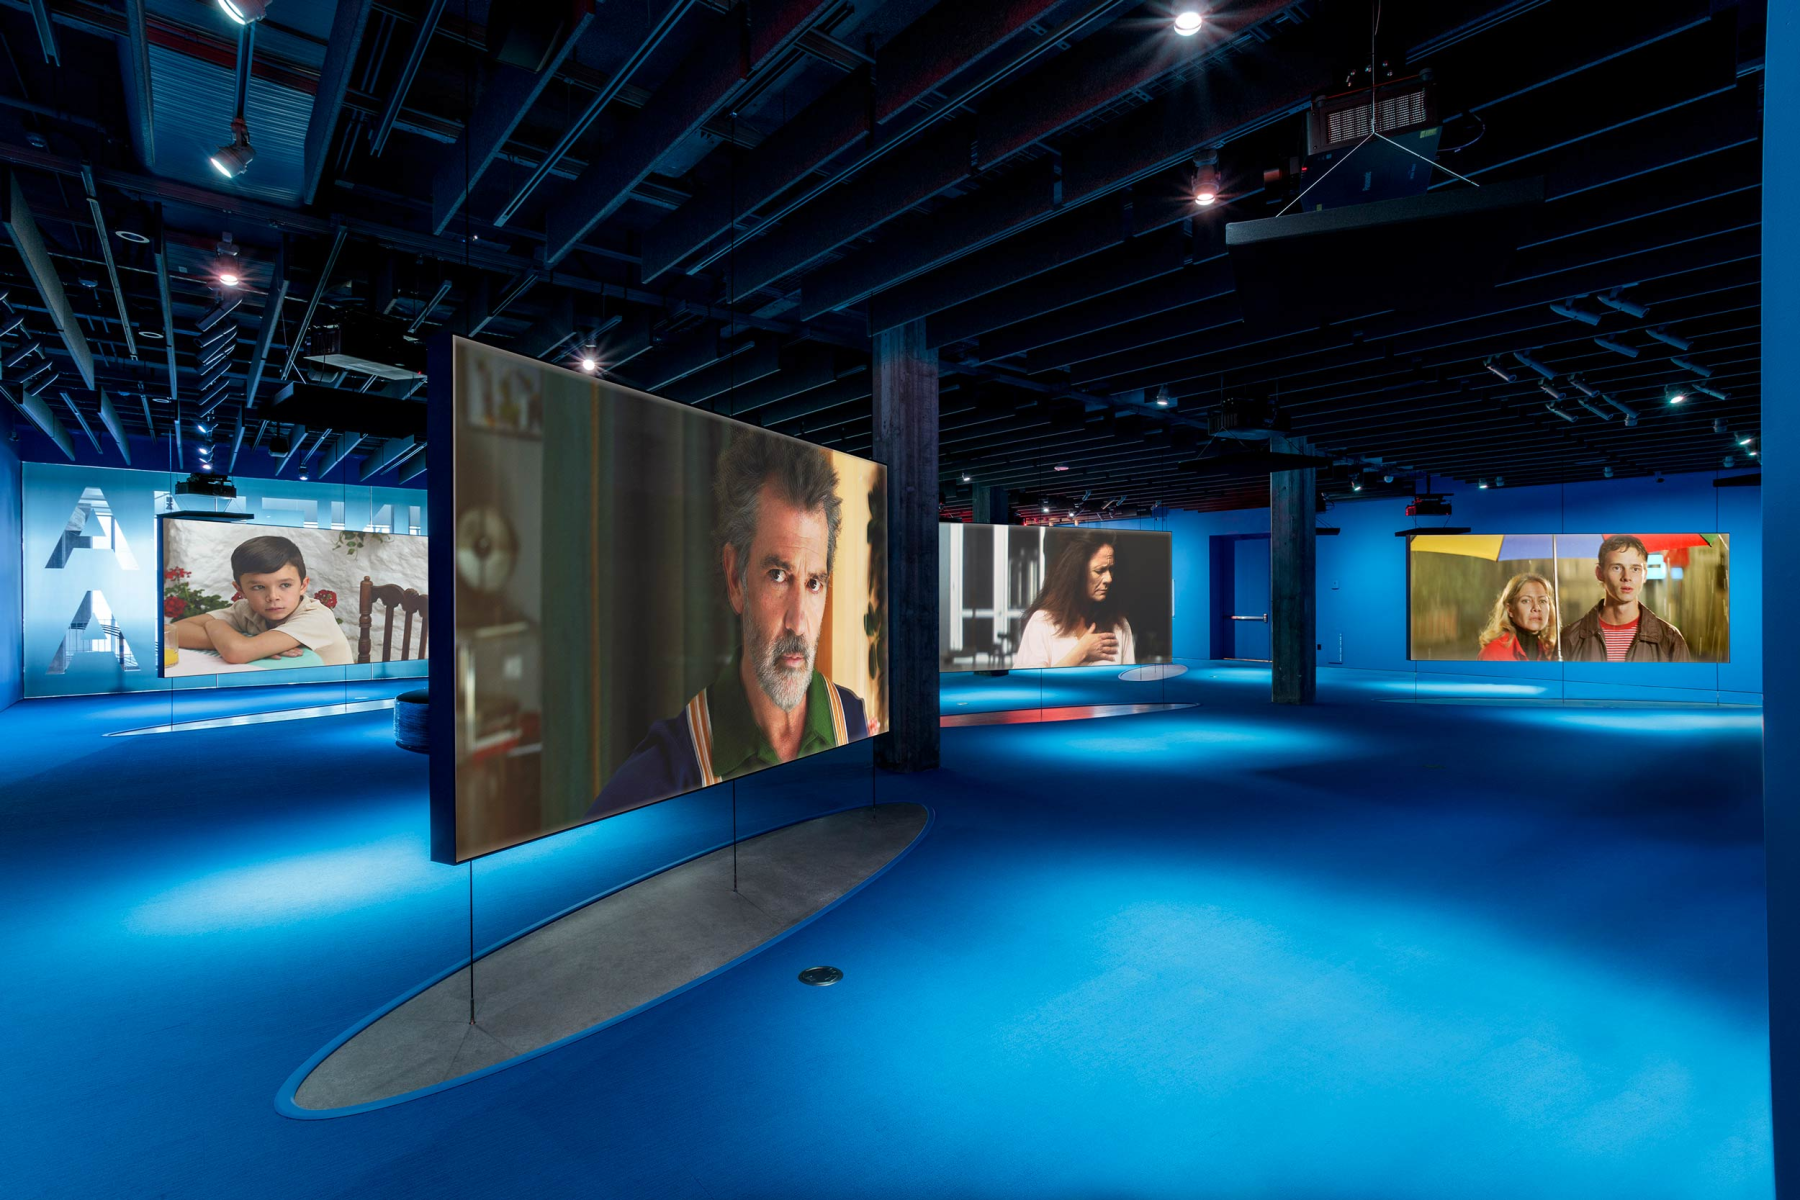 Installation: Pedro Almodóvar, <i>Stories of Cinema </i>, Academy Museum of Motion Pictures, photo by Joshua White, JWPictures/©Academy Museum Foundation